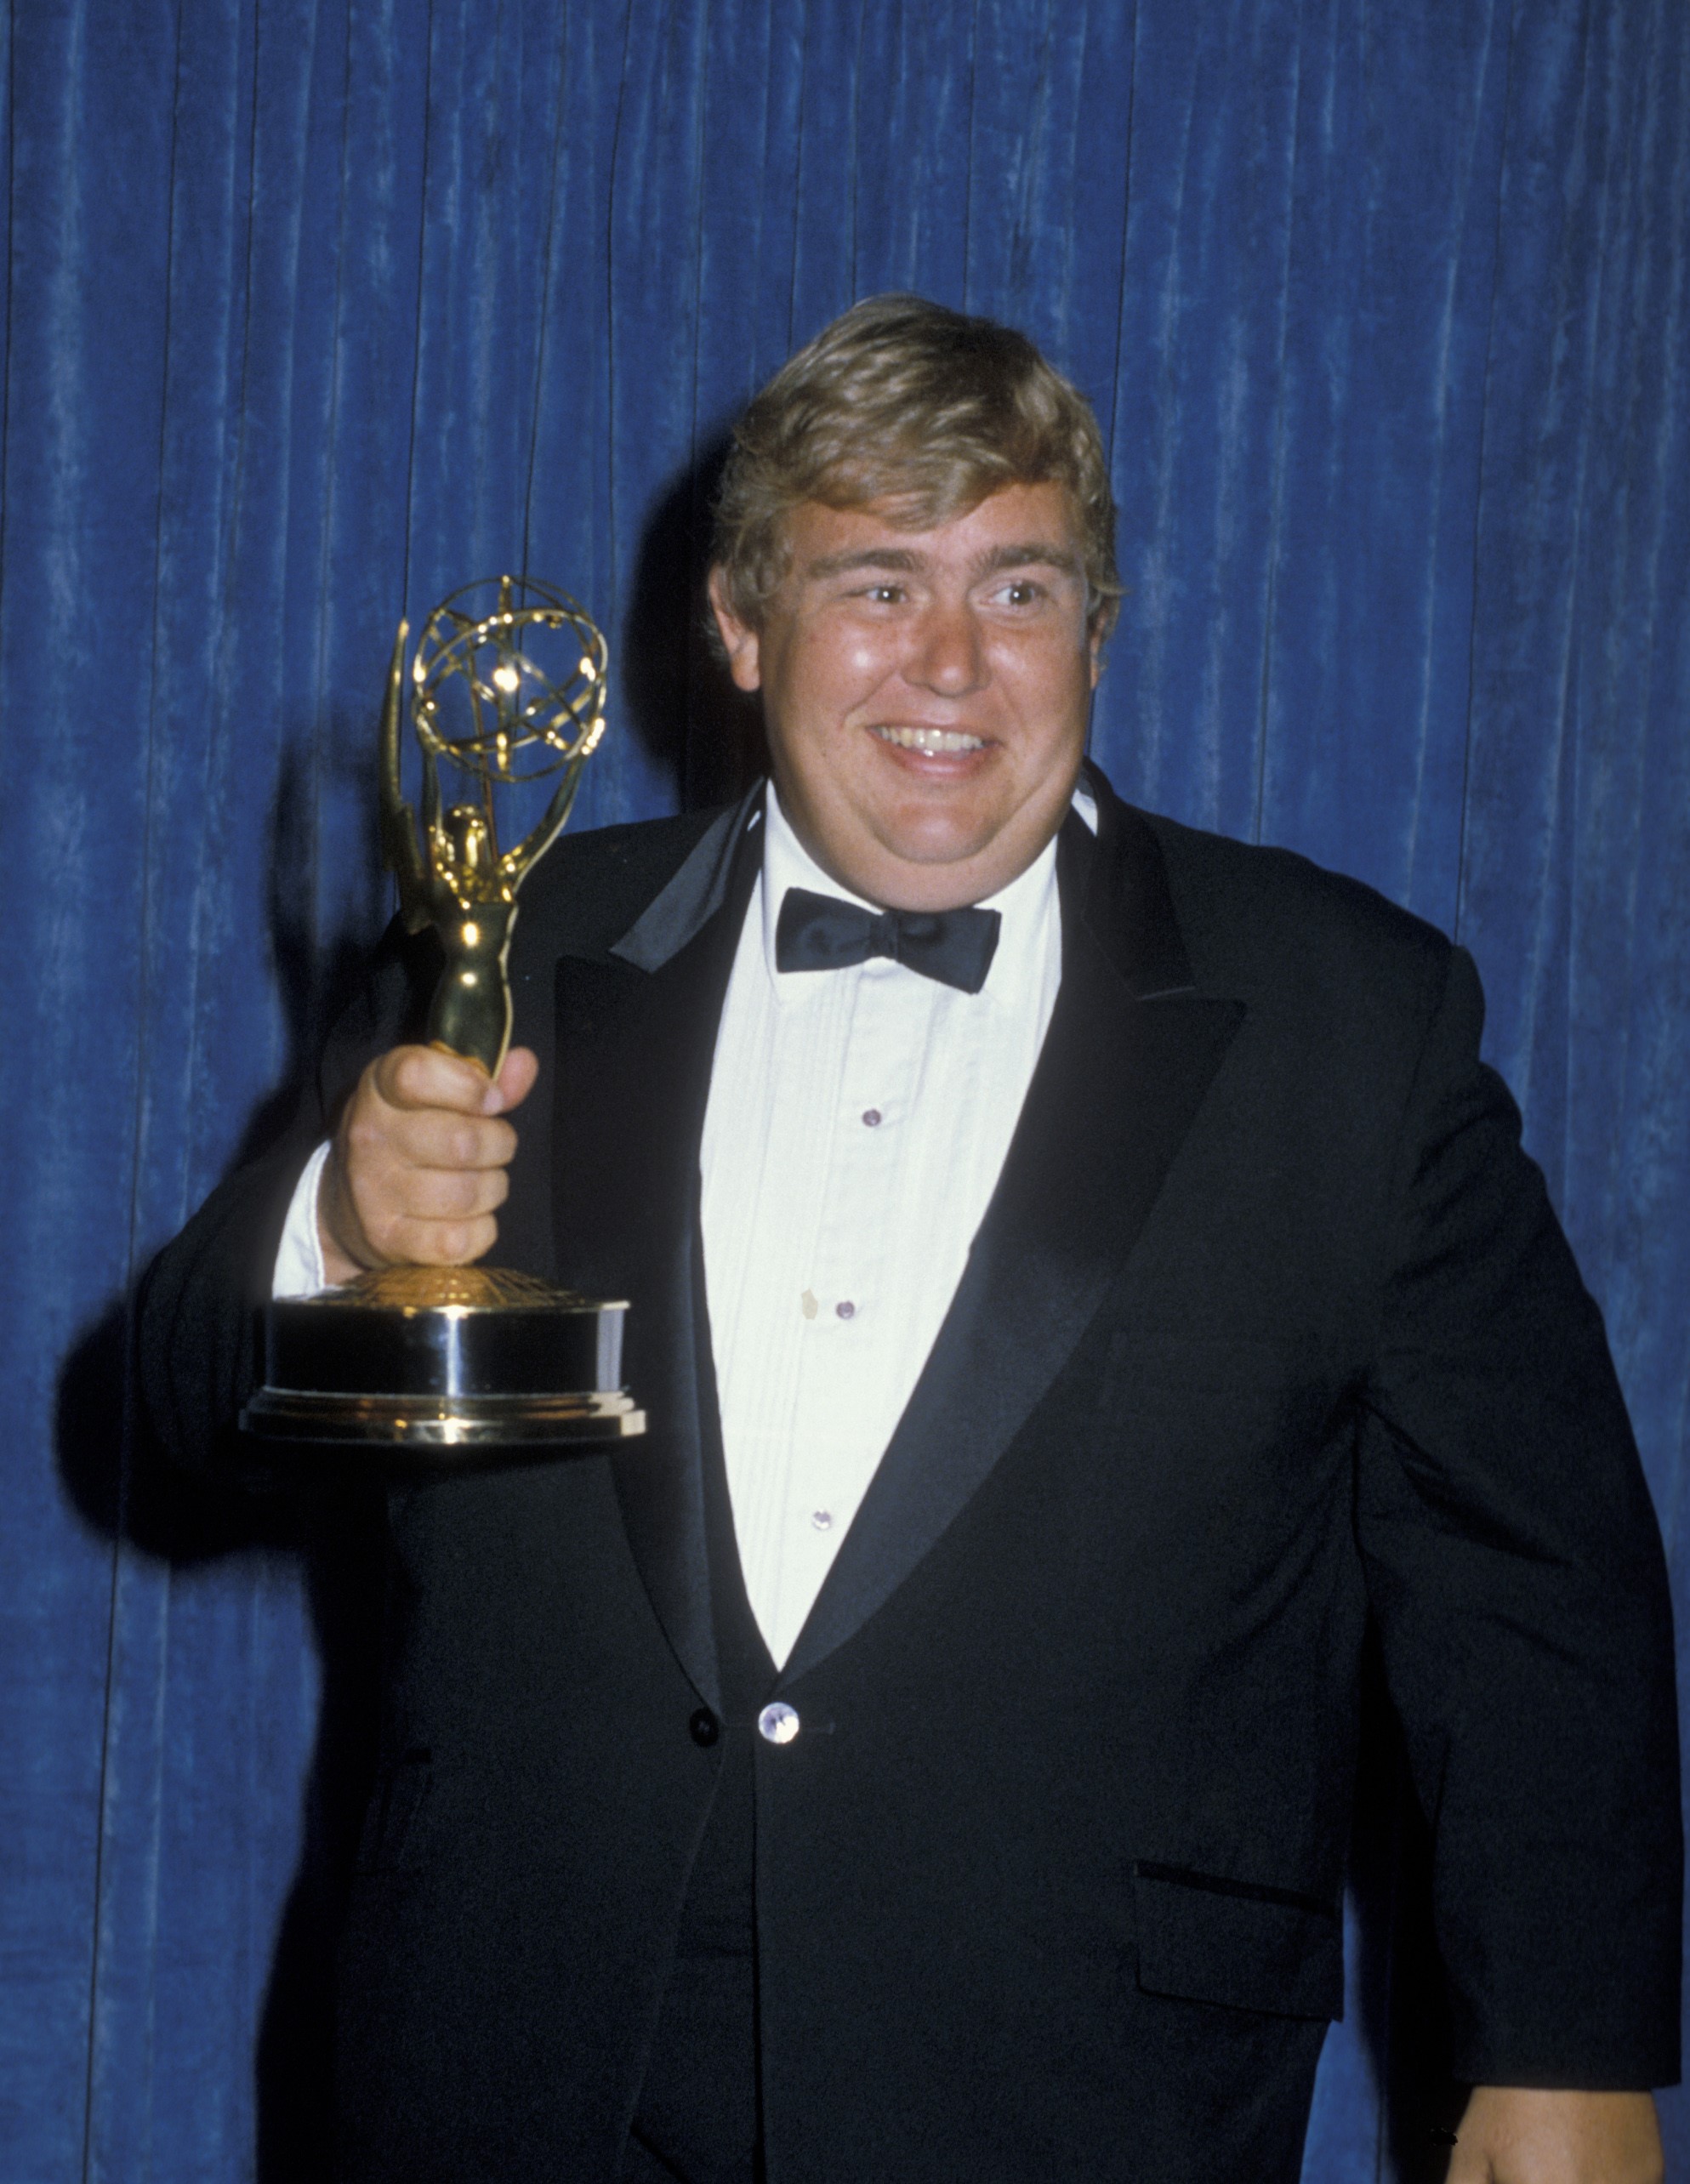 John Candy at the 35th Annual Primetime Emmy Awards on September 25, 1983, in Pasadena, California. | Source: Getty Images